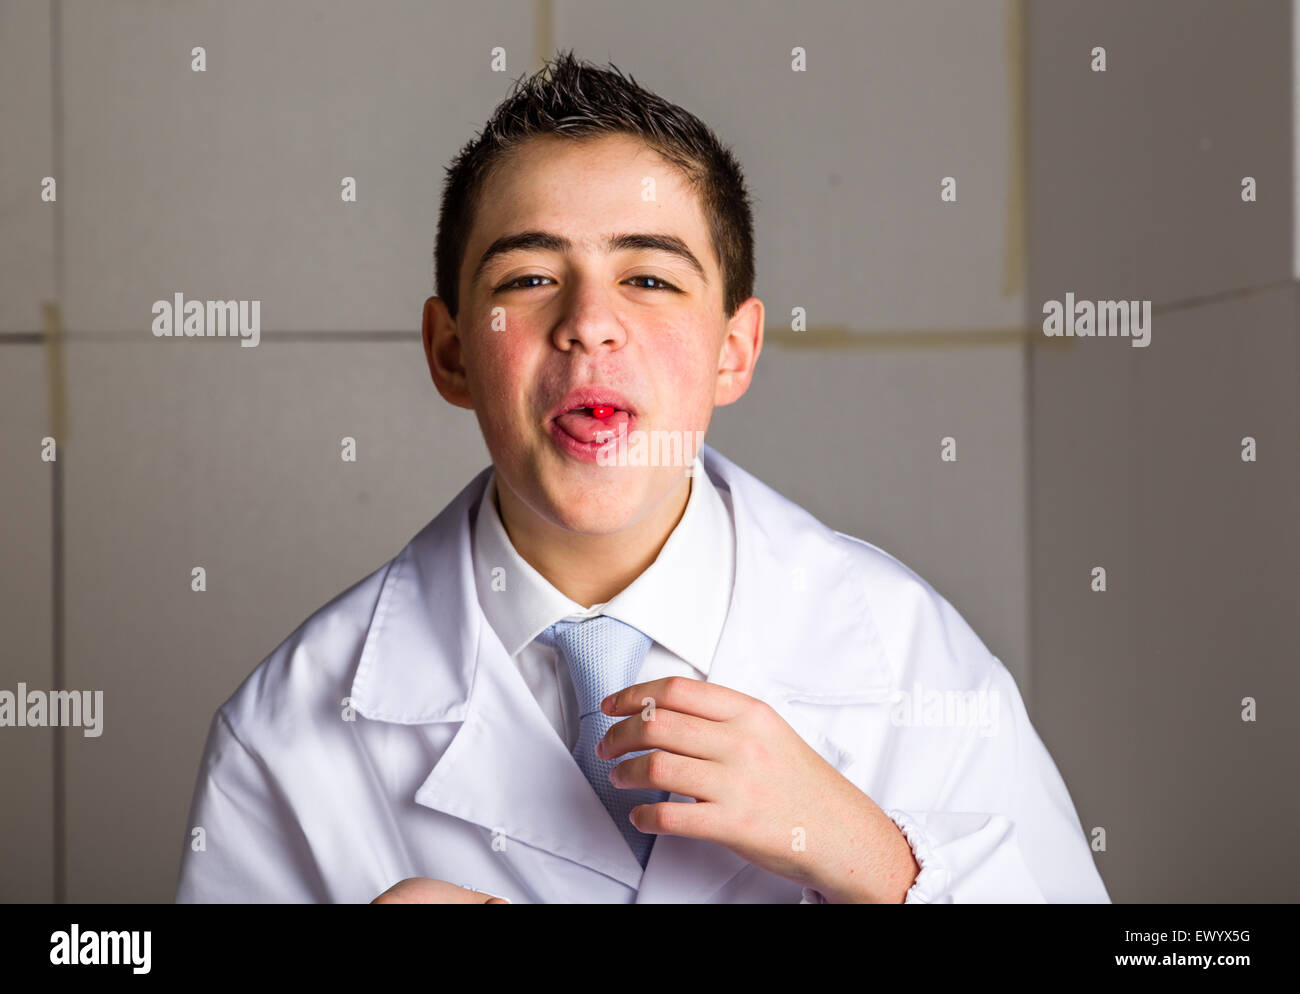 Boy dressed as a doctor in light blue tie and white coat helps to feel medicine more friendly: he is showing his tongue with a pill on it. His acne skin has not ben retouched Stock Photo